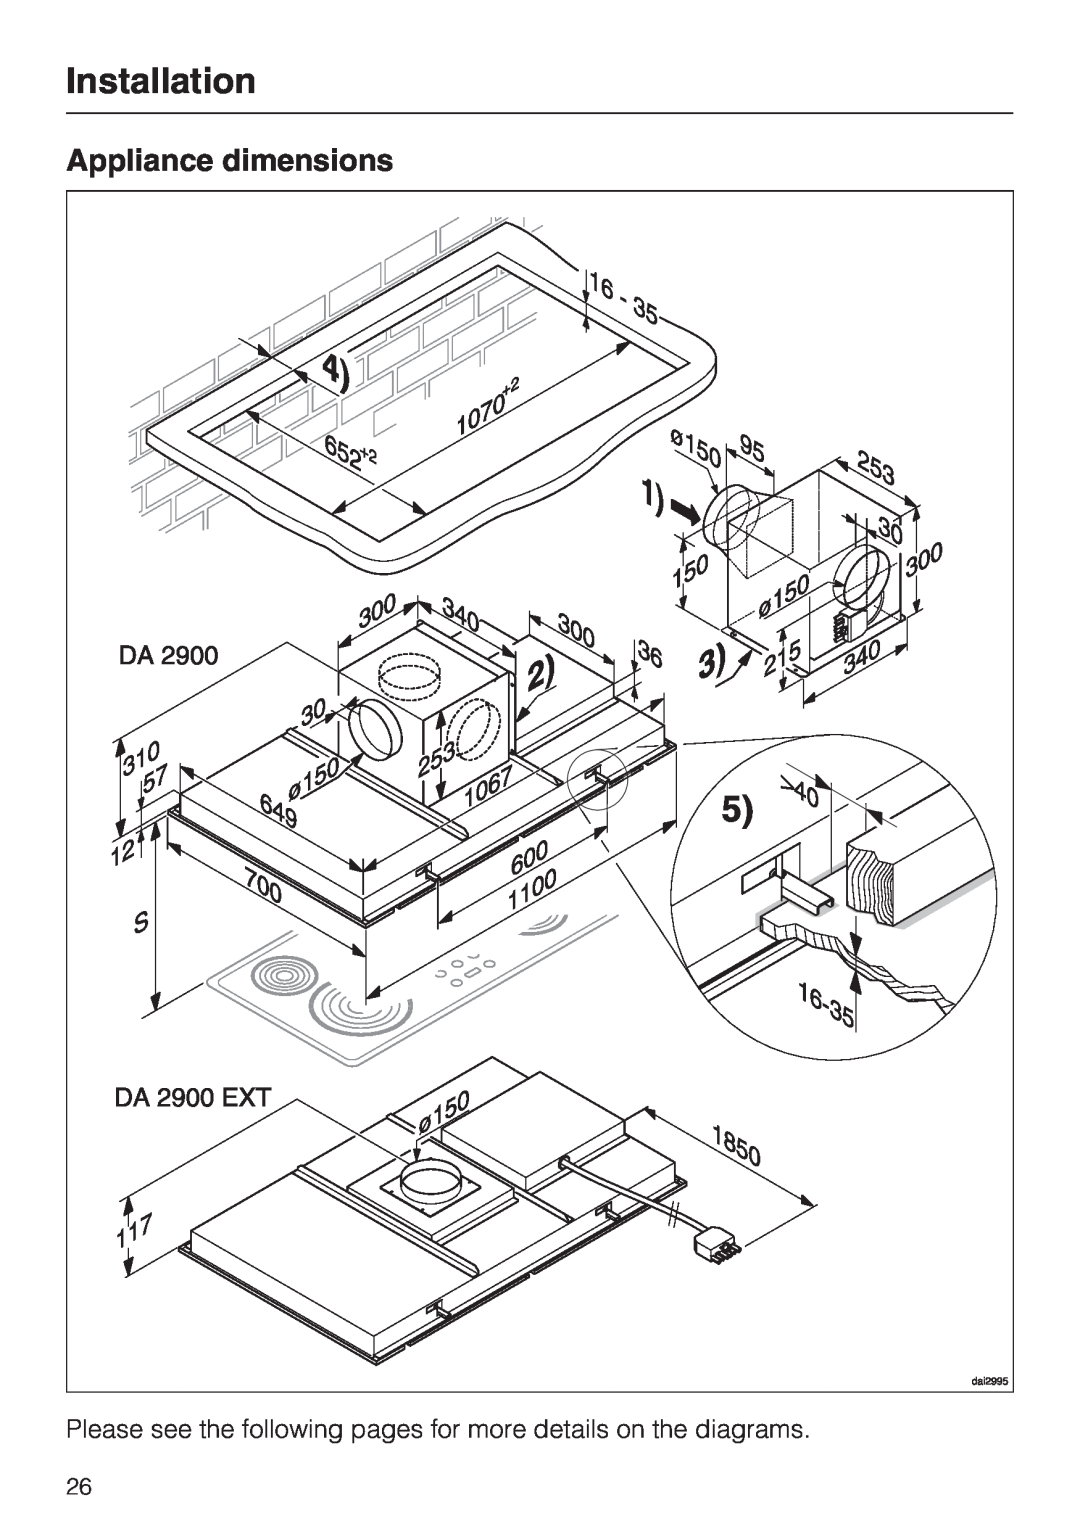 Miele DA2900EXT installation instructions Installation, Appliance dimensions 